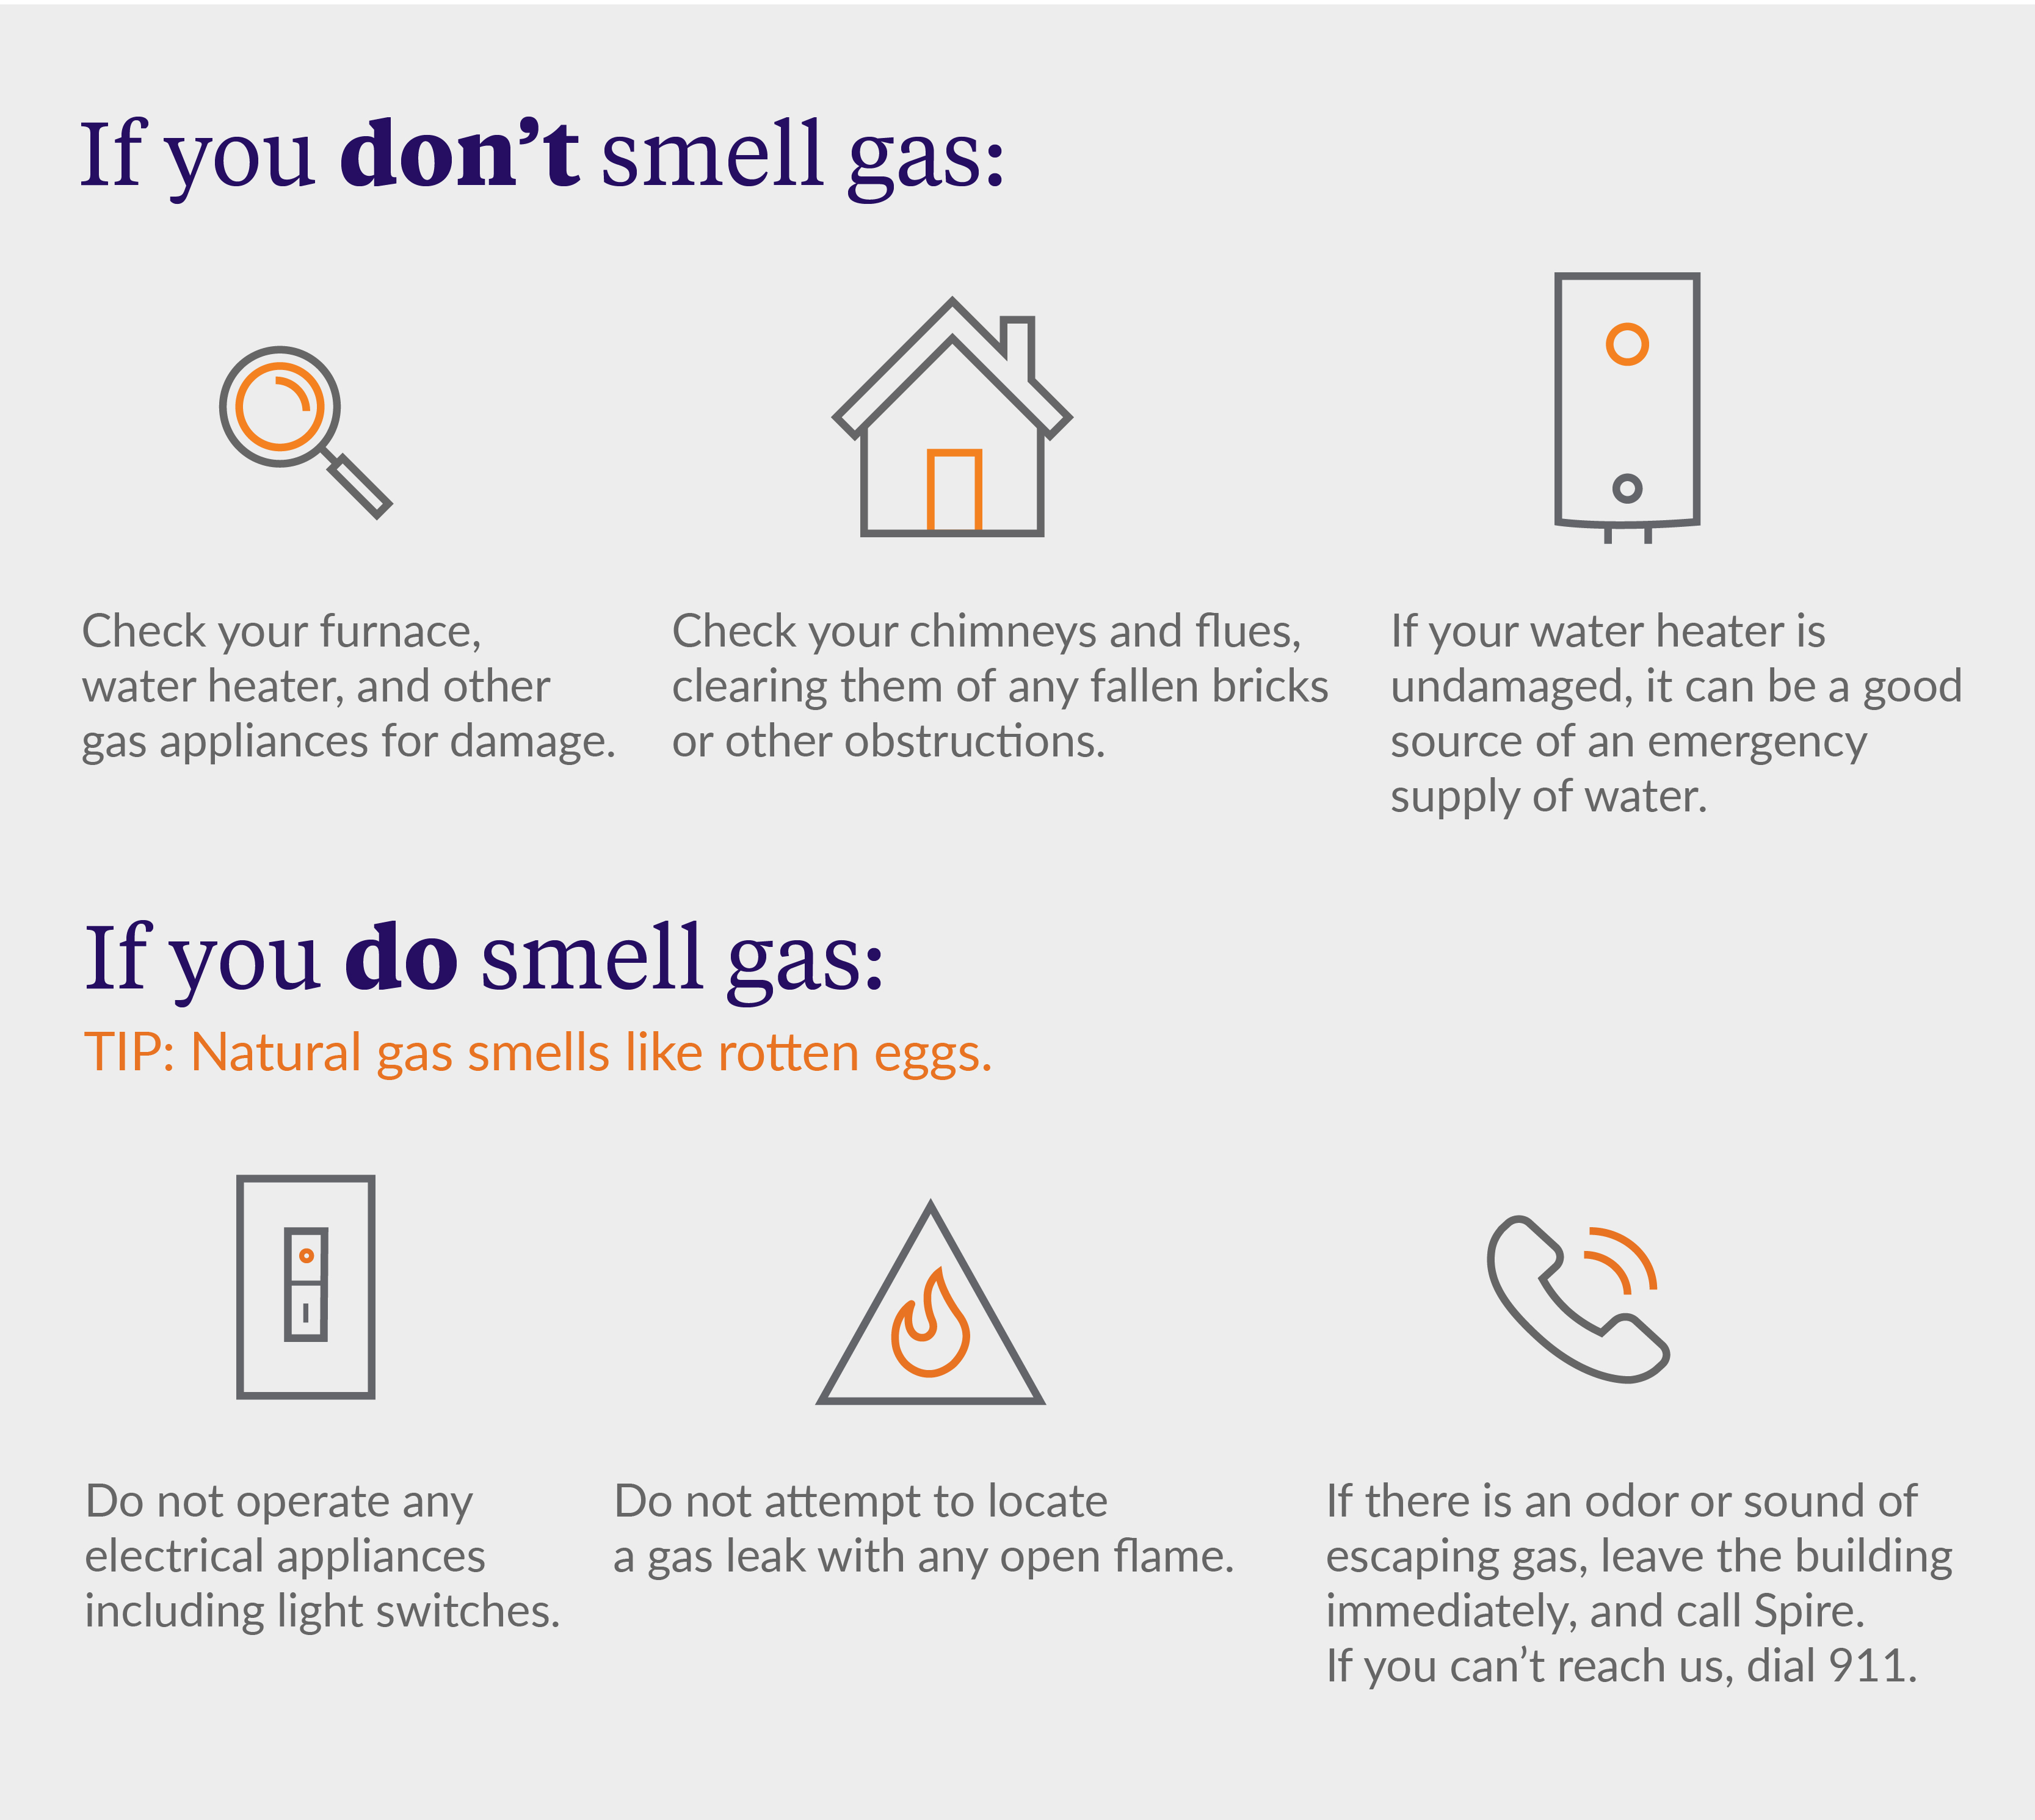 Image describes what to do if you smell natural gas after a natural disaster